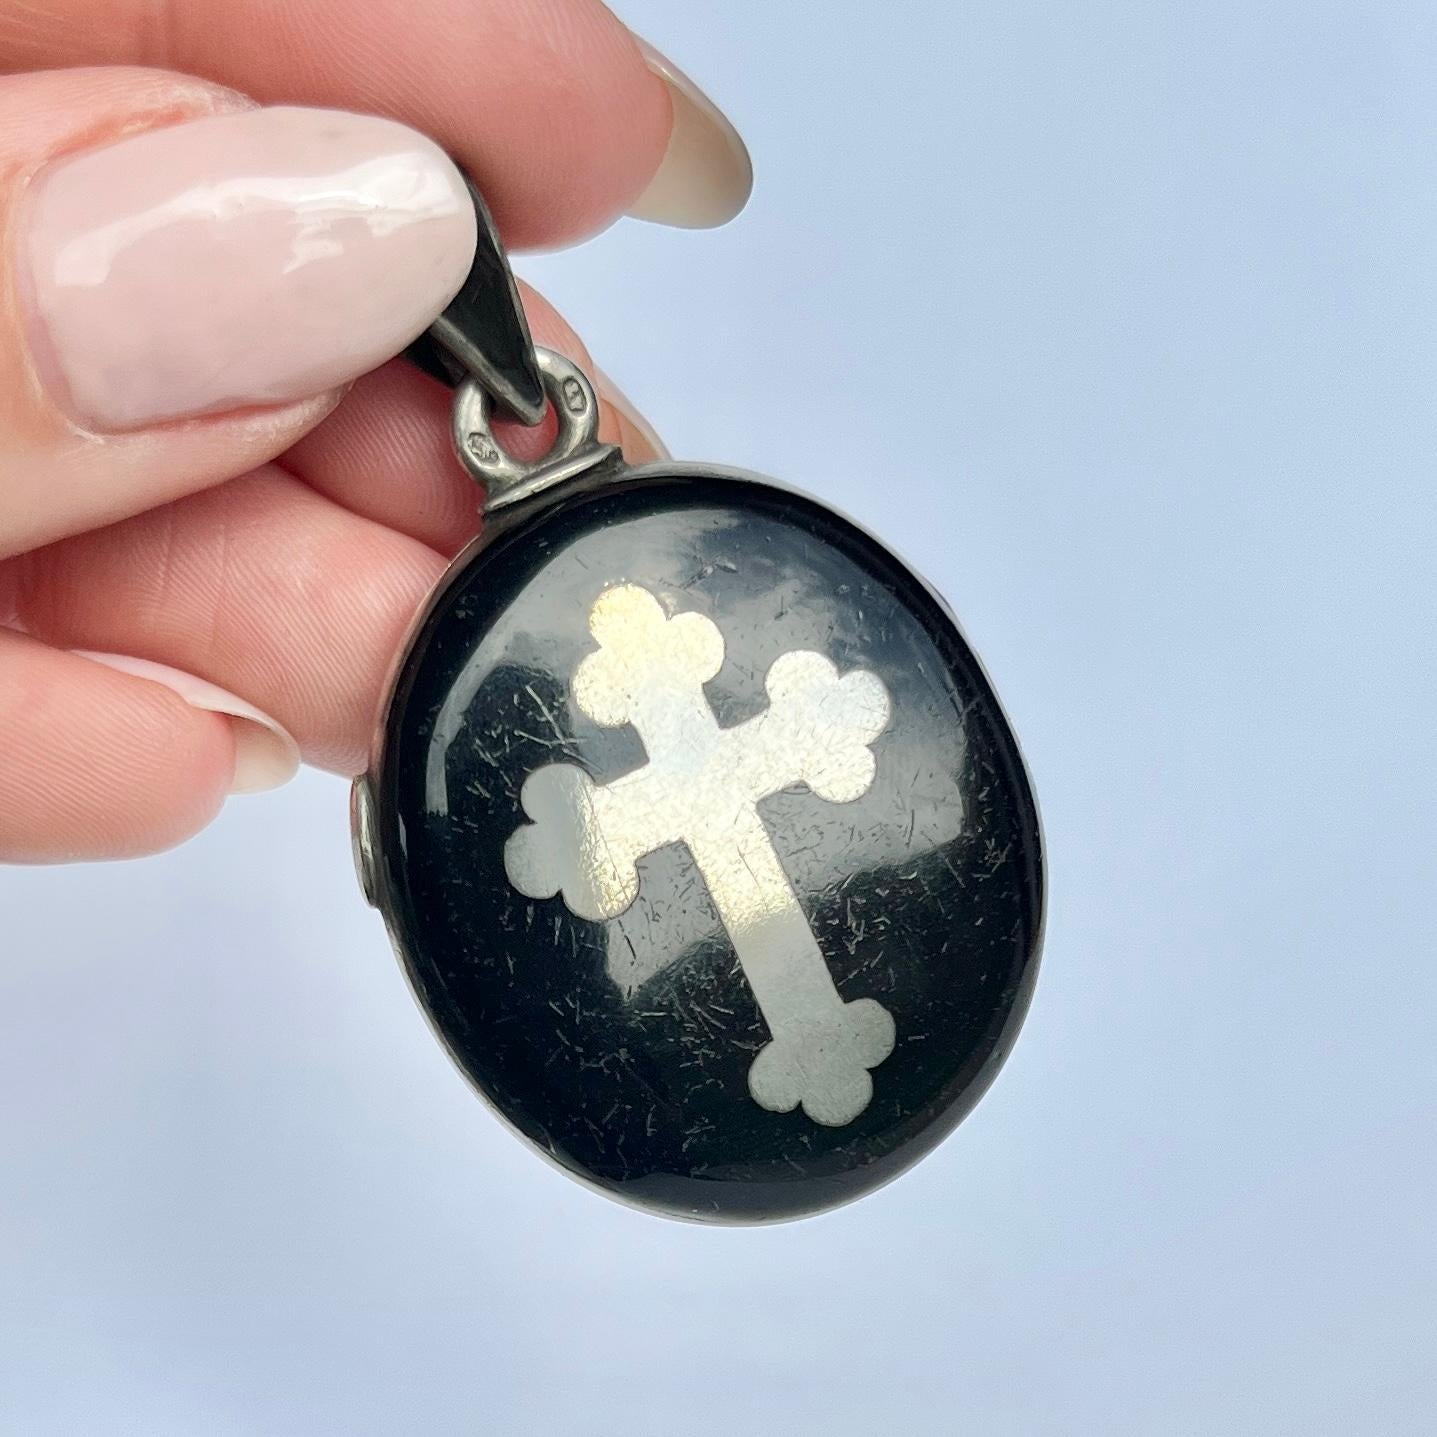 The enamel on this locket is black and wonderfully glossy, it really makes the silver pop. The locket also holds a cross on the front. The back of the locket is simply coated in the black enamel. 

Locket Dimensions inc loop: 32x50mm

Weight: 21.5g